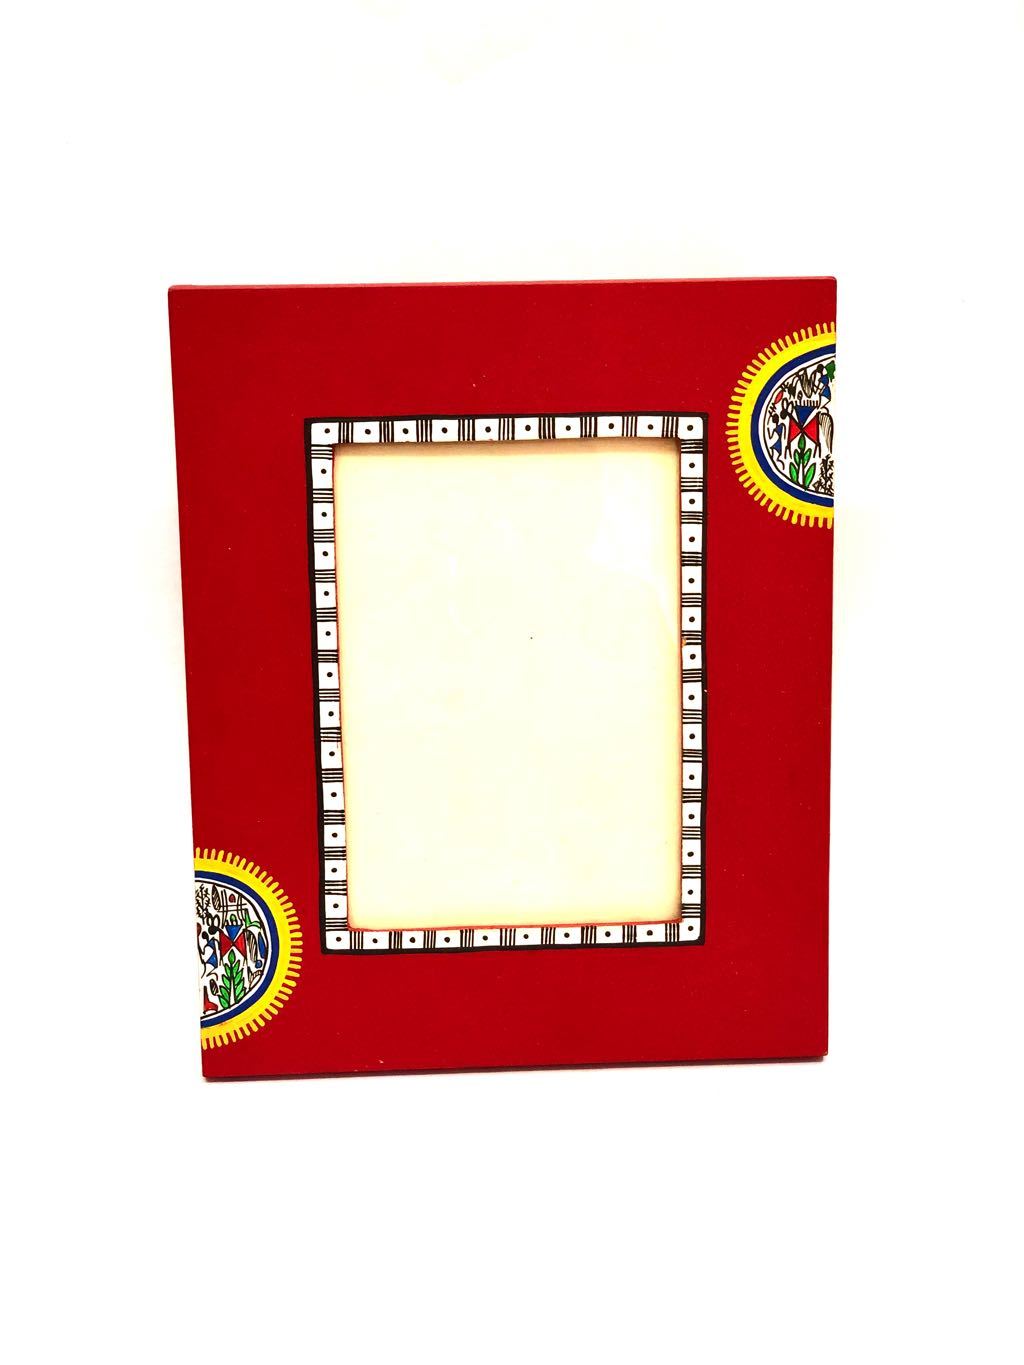 Photo Frame Classic Red With Tribal Warli Art Gifting Series Tamrapatra